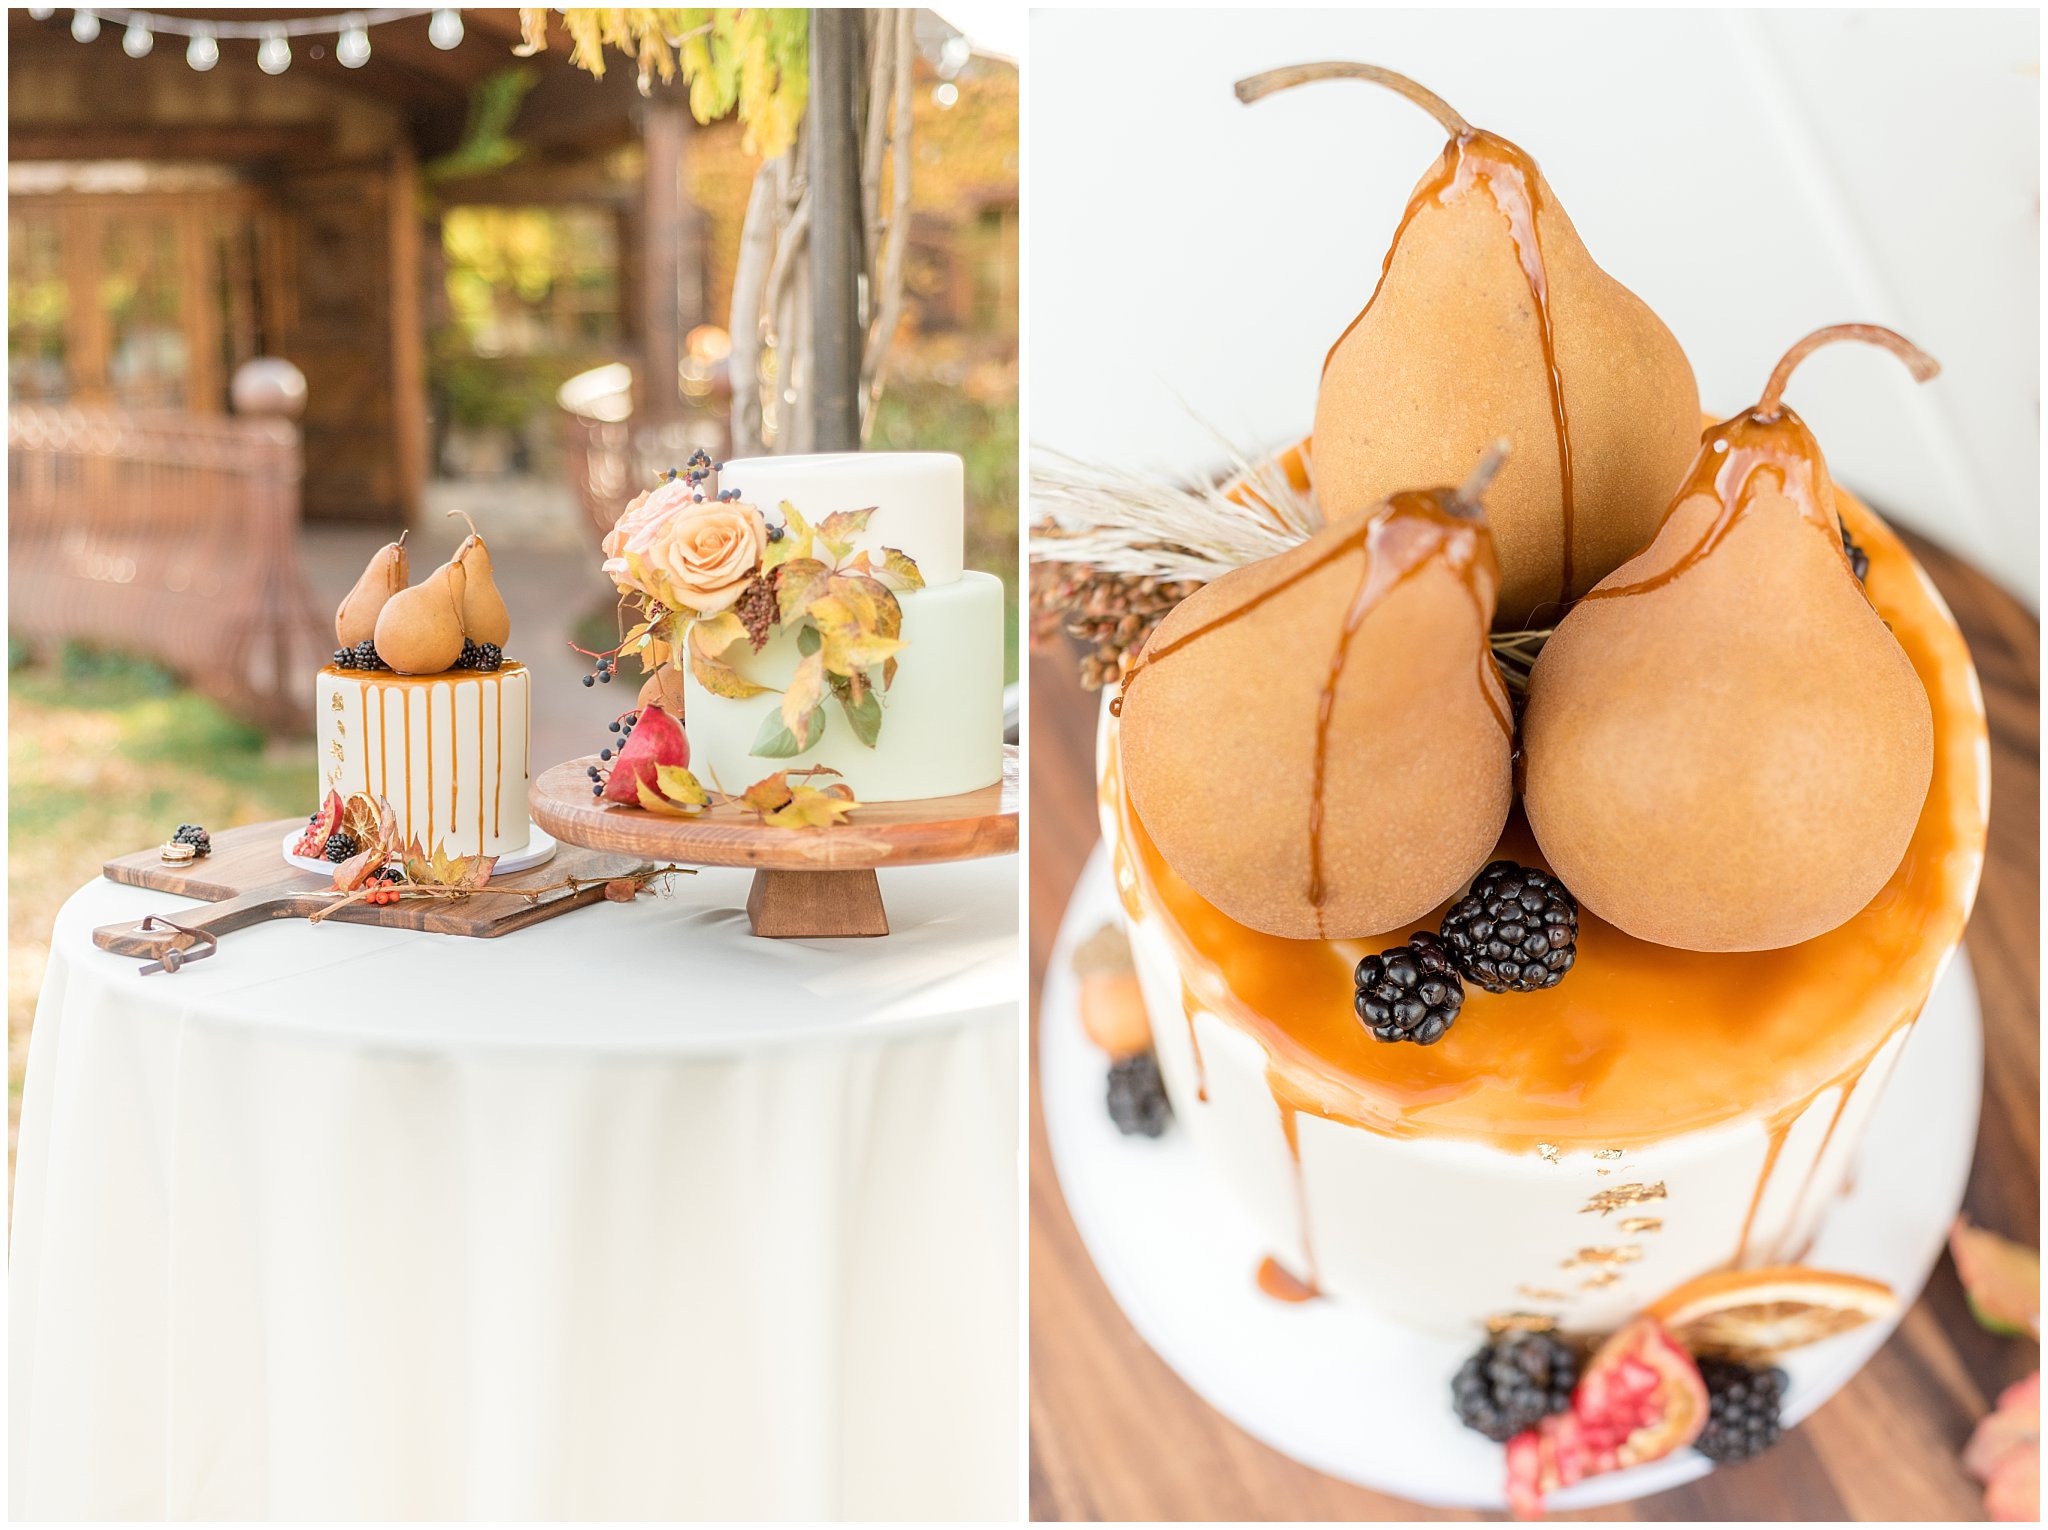 Drizzled caramel on pears, blackberries, and oranges fall wedding cake inspiration | Jessie and Dallin Photography